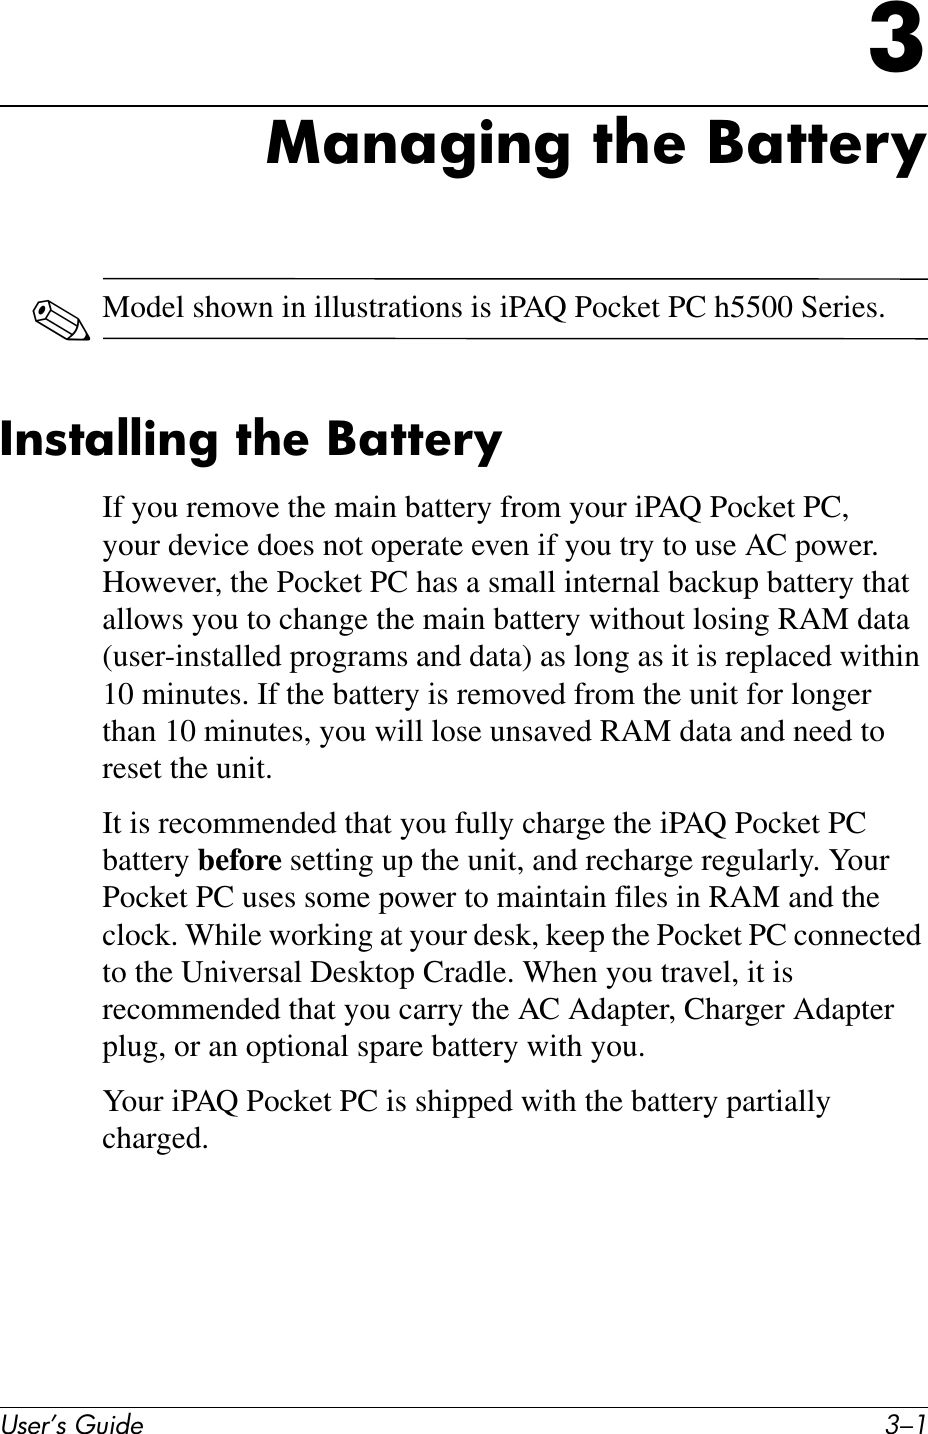 User’s Guide 3–13Managing the Battery✎Model shown in illustrations is iPAQ Pocket PC h5500 Series.Installing the BatteryIf you remove the main battery from your iPAQ Pocket PC, your device does not operate even if you try to use AC power. However, the Pocket PC has a small internal backup battery that allows you to change the main battery without losing RAM data (user-installed programs and data) as long as it is replaced within 10 minutes. If the battery is removed from the unit for longer than 10 minutes, you will lose unsaved RAM data and need to reset the unit.It is recommended that you fully charge the iPAQ Pocket PC battery before setting up the unit, and recharge regularly. Your Pocket PC uses some power to maintain files in RAM and the clock. While working at your desk, keep the Pocket PC connected to the Universal Desktop Cradle. When you travel, it is recommended that you carry the AC Adapter, Charger Adapter plug, or an optional spare battery with you.Your iPAQ Pocket PC is shipped with the battery partially charged.